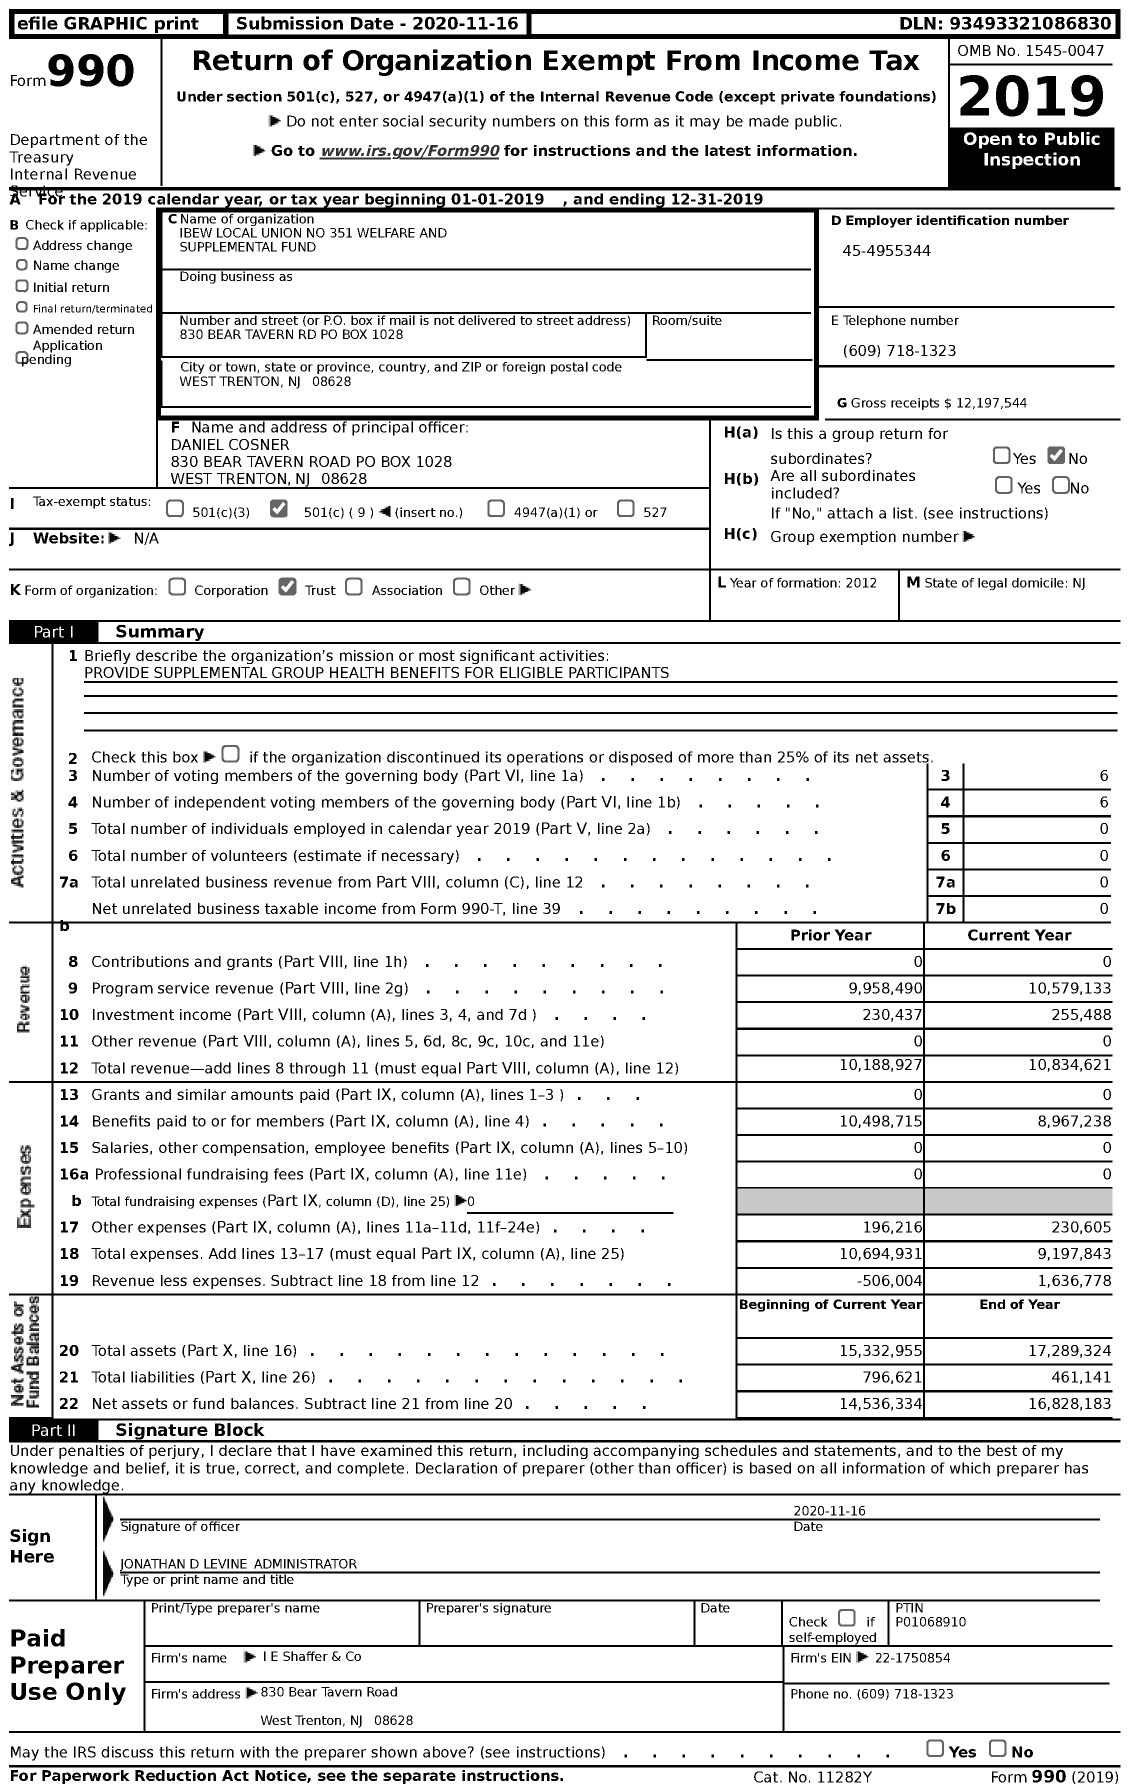 Image of first page of 2019 Form 990 for IBEW Local Union No 351 Welfare and Supplemental Fund